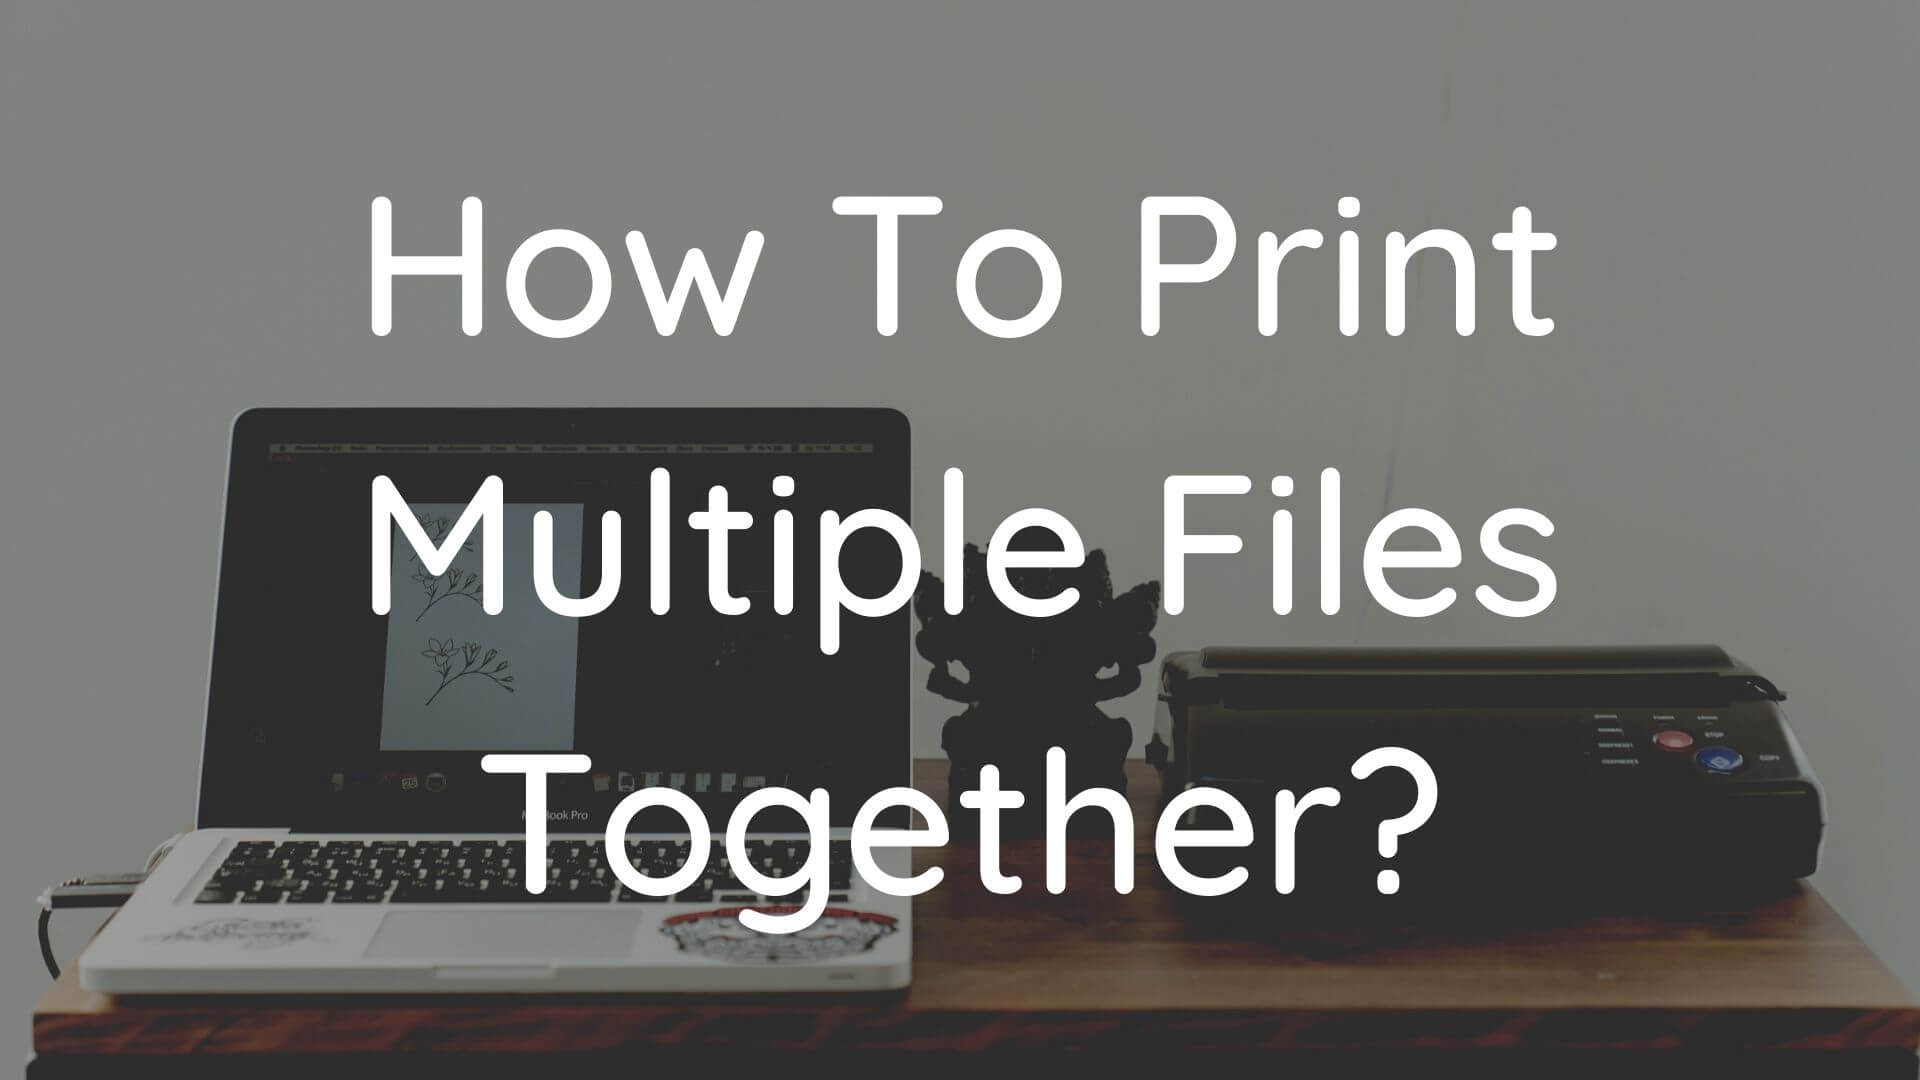 To Print Multiple Together in Windows 10